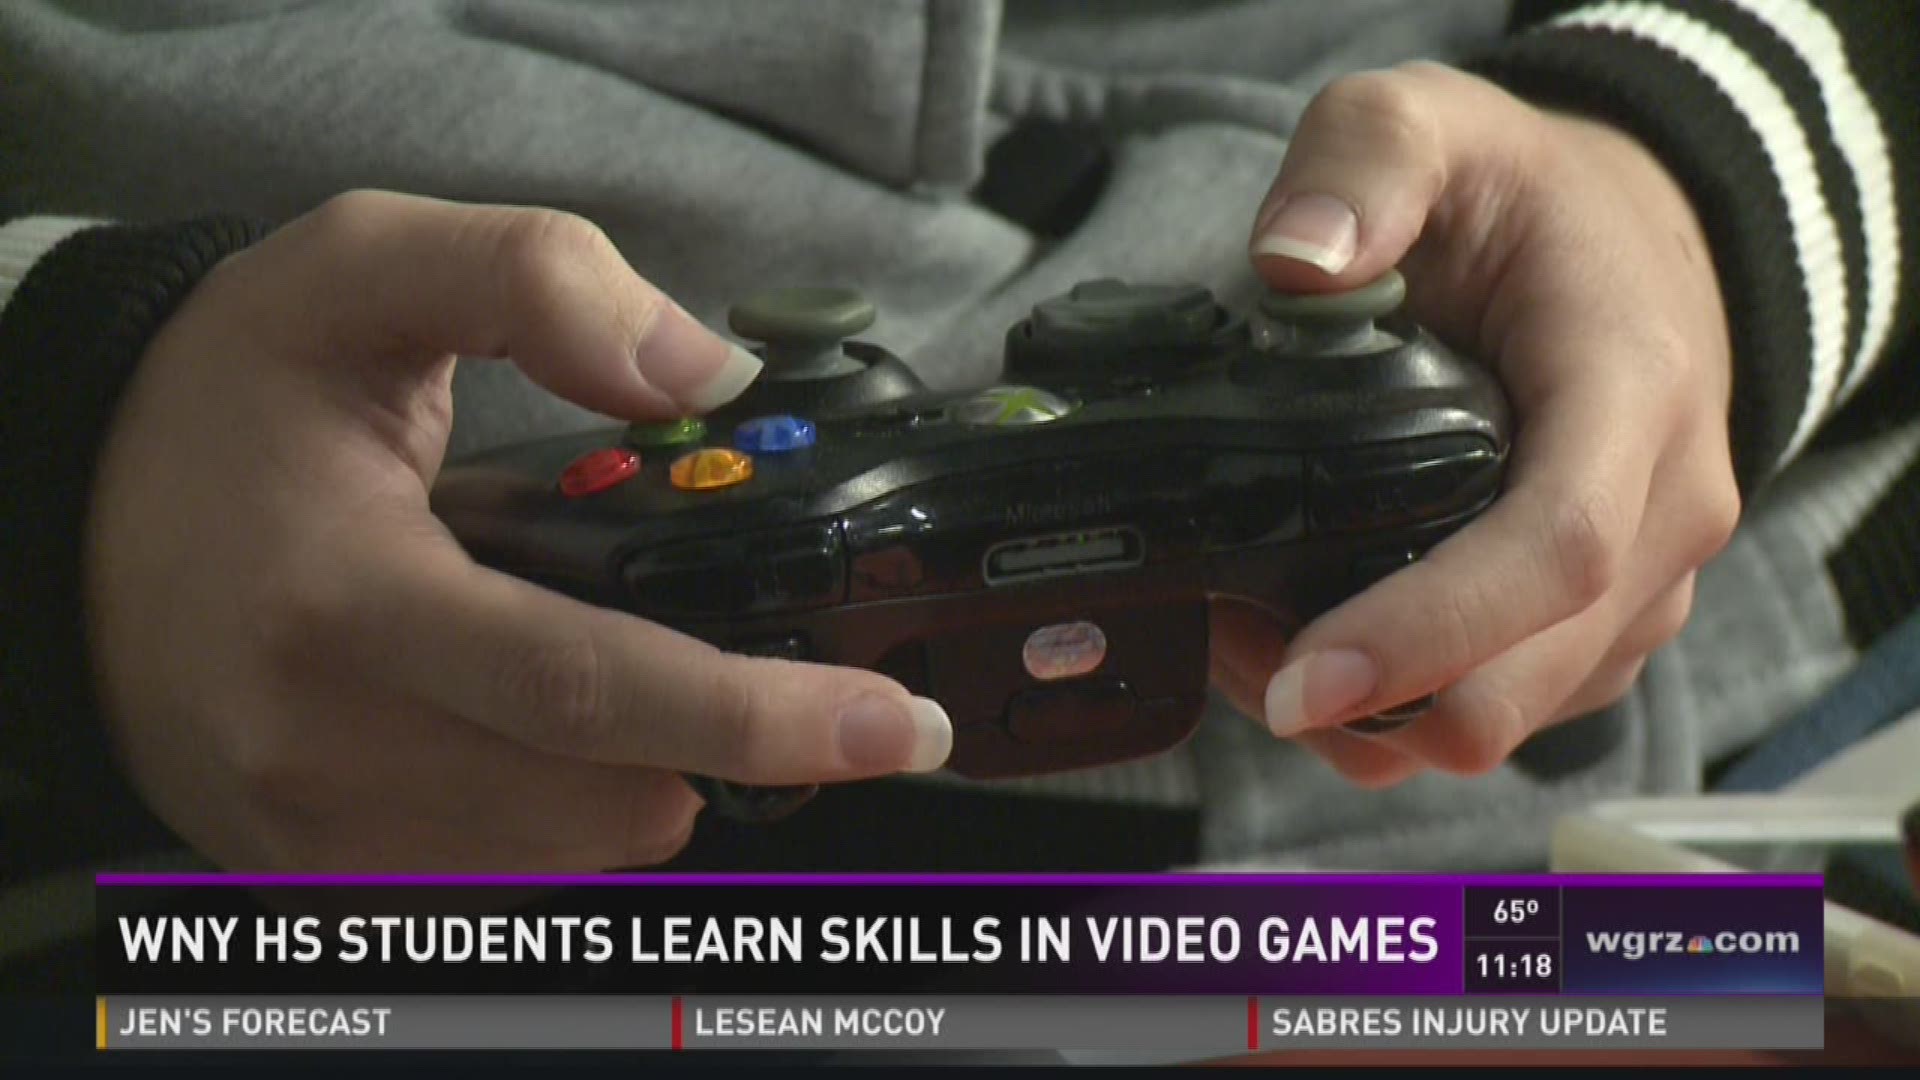 WNY HS STUDENTS LEARN SKILLS IN VIDEO GAMES